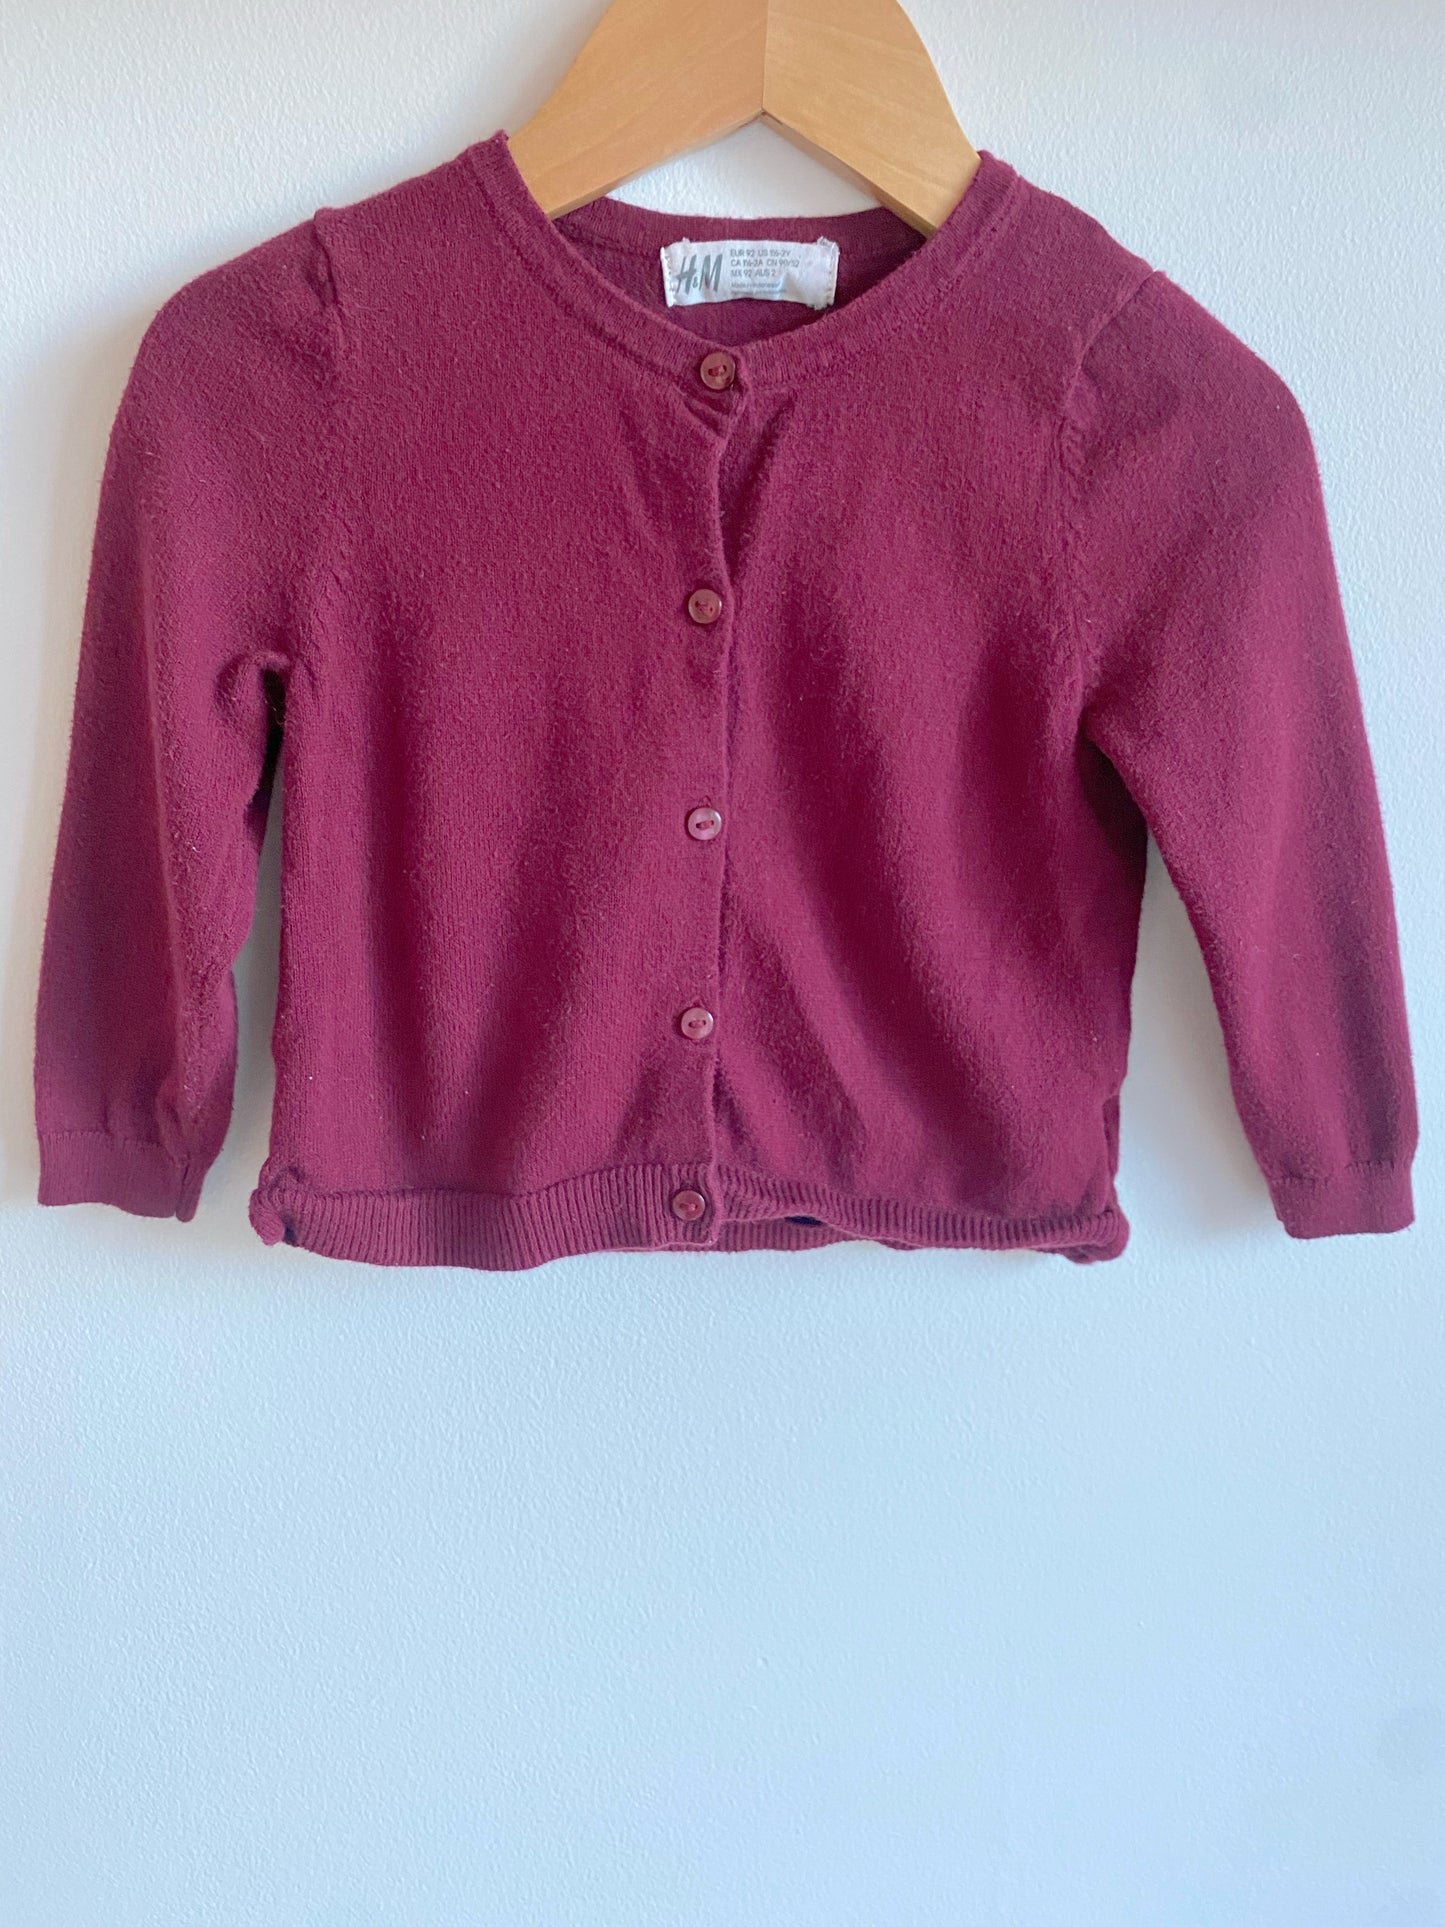 H&M Sweater Kids Consignment 1-2 years old